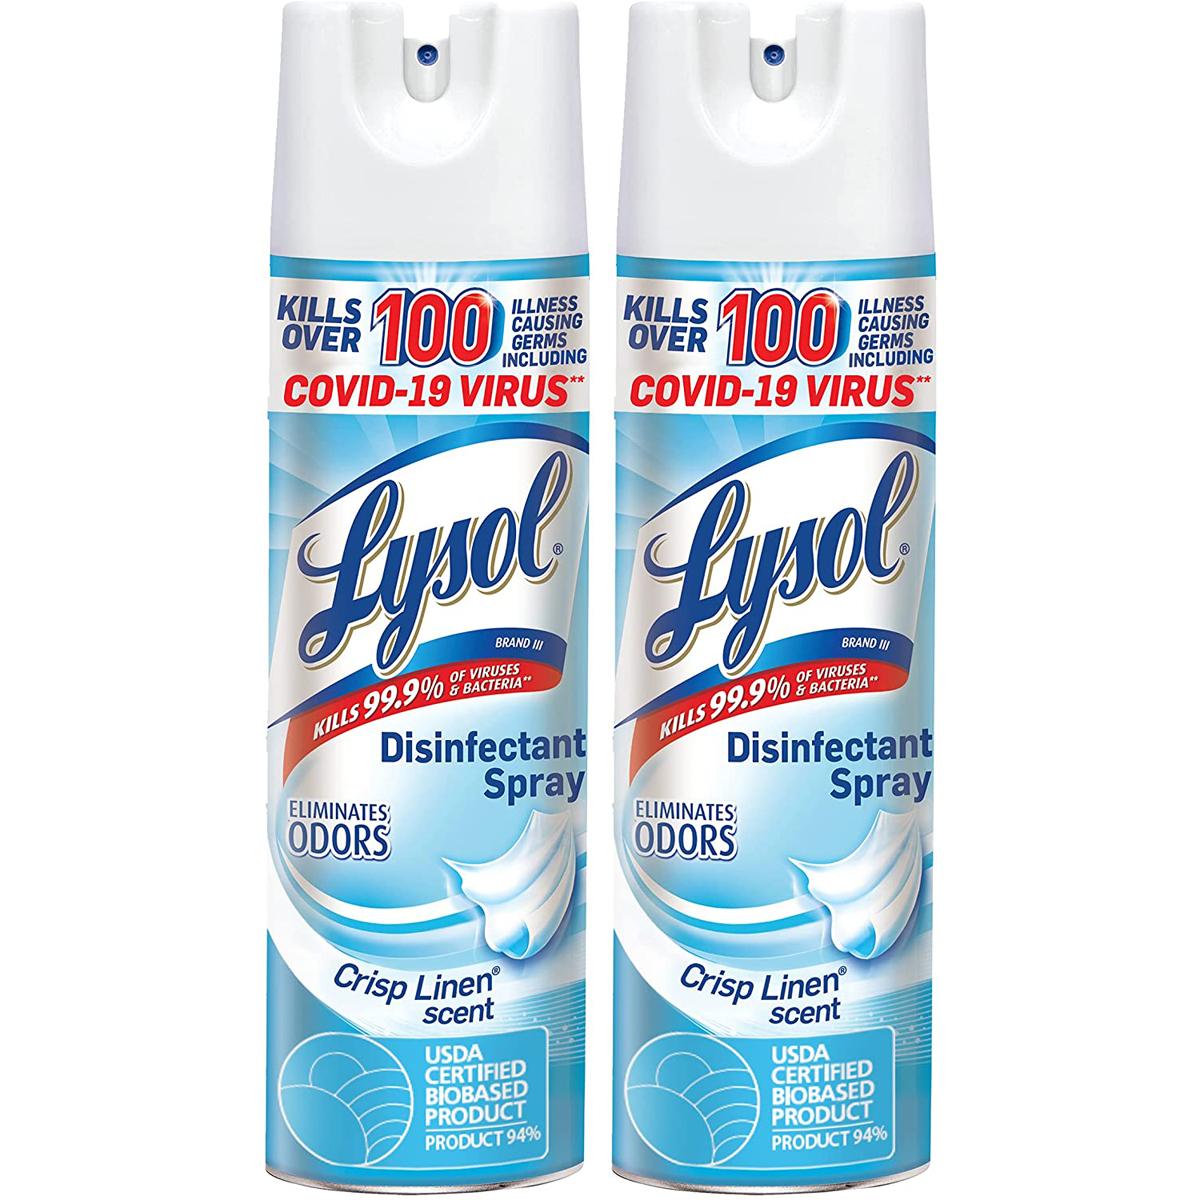 2 Lysol Disinfecting Spray for $8.29 Shipped